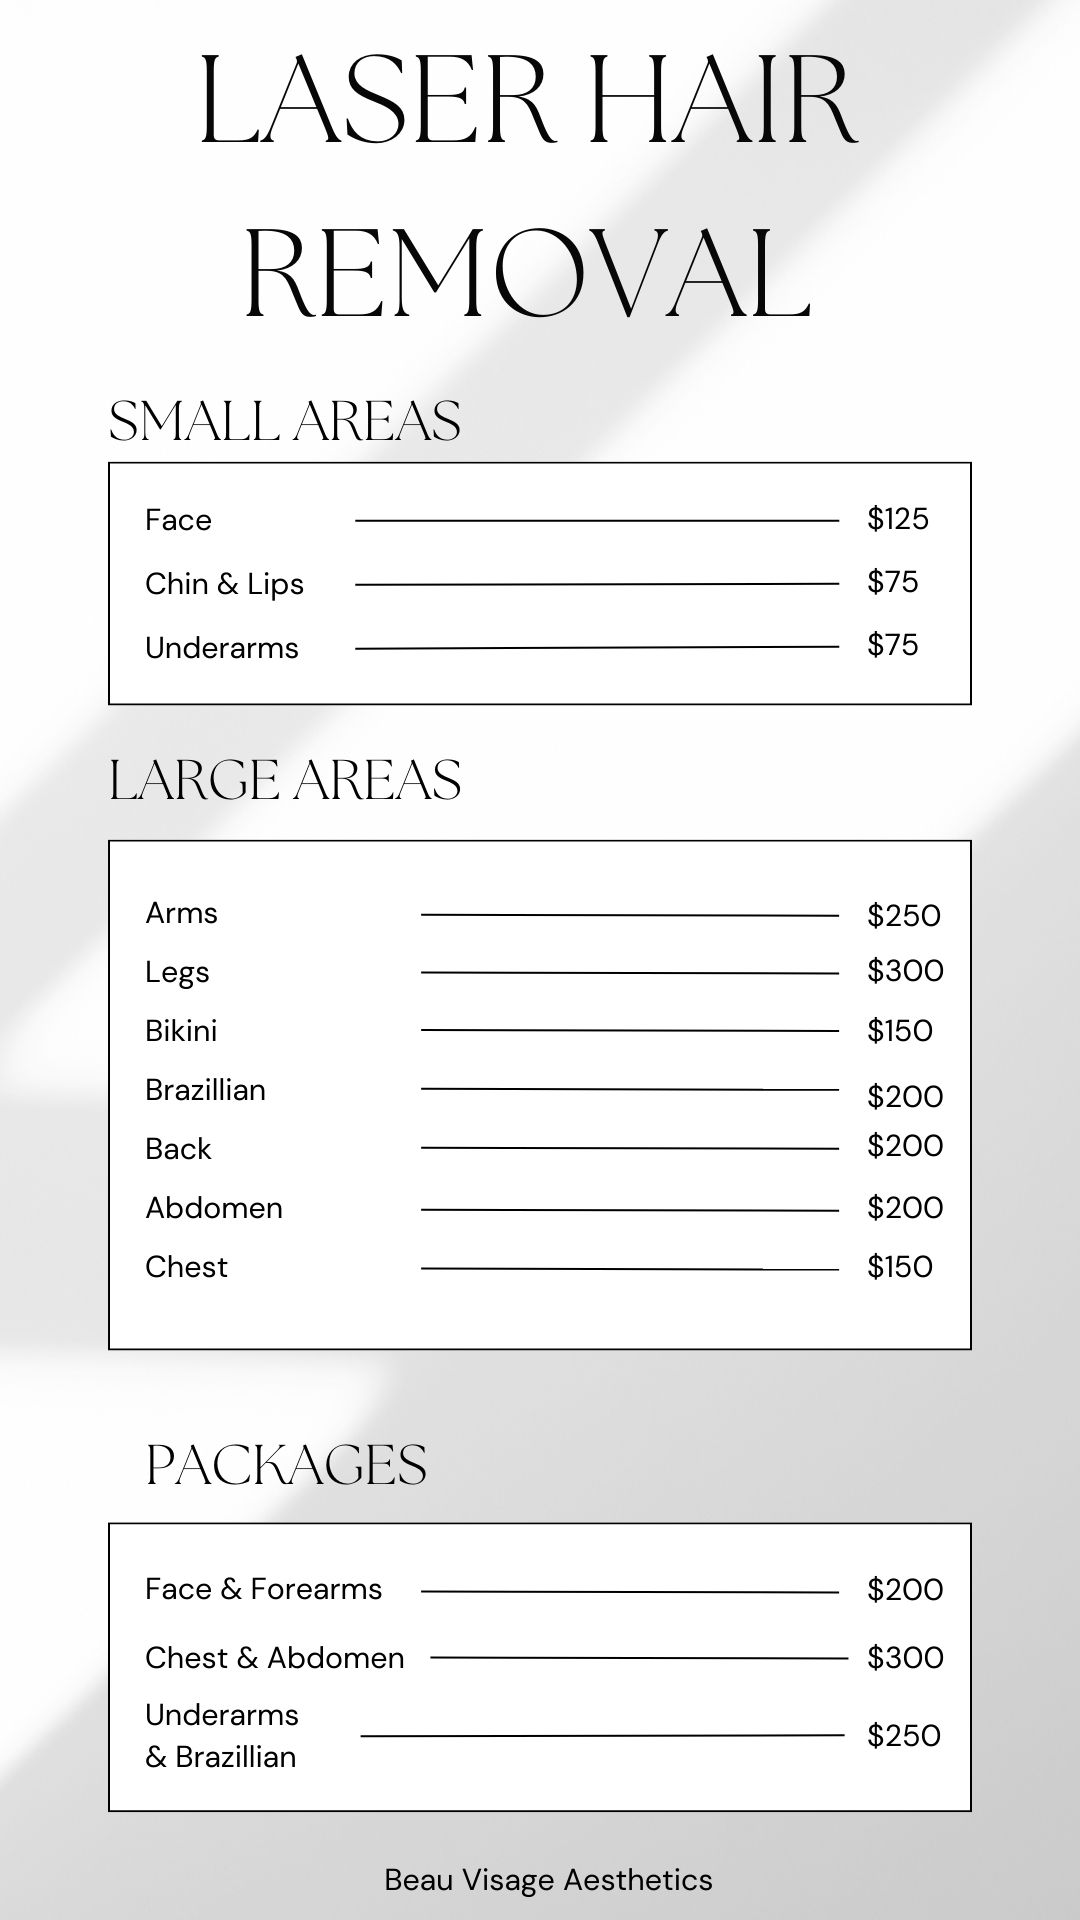 Laser hair removal prise list promo package